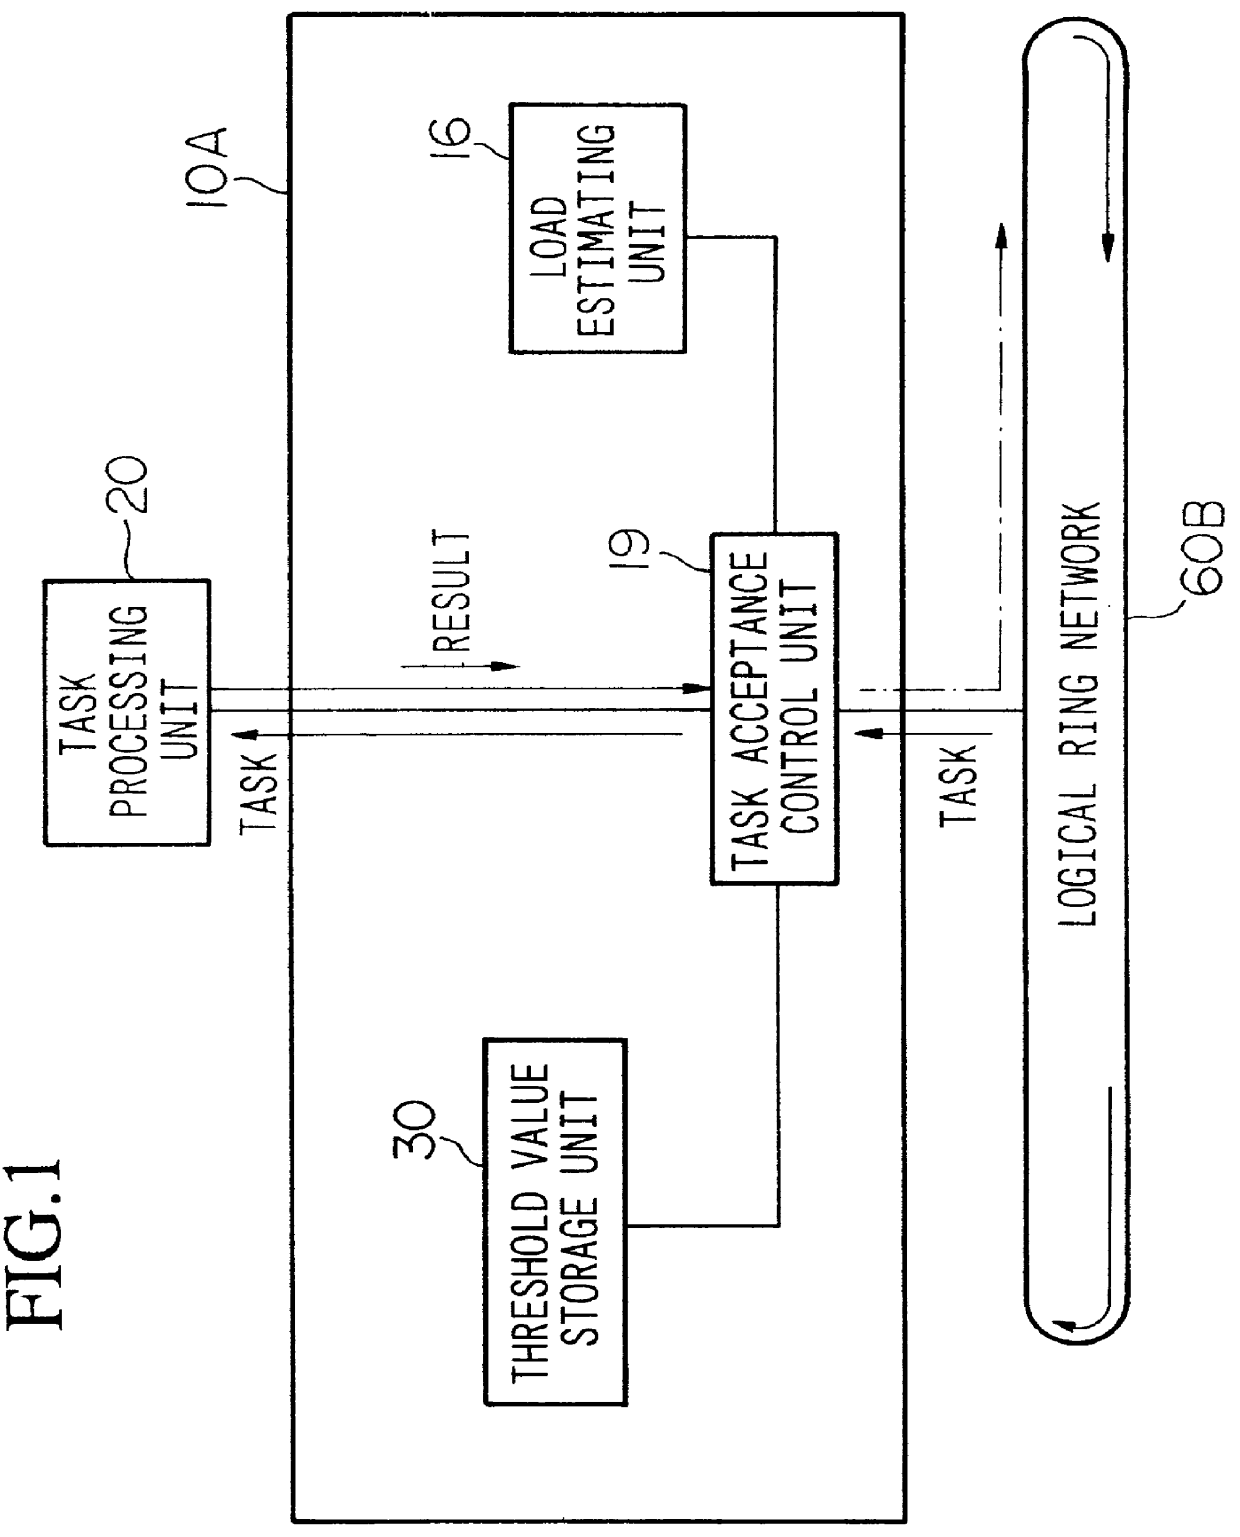 Non-uniform system load balance method and apparatus for updating threshold of tasks according to estimated load fluctuation